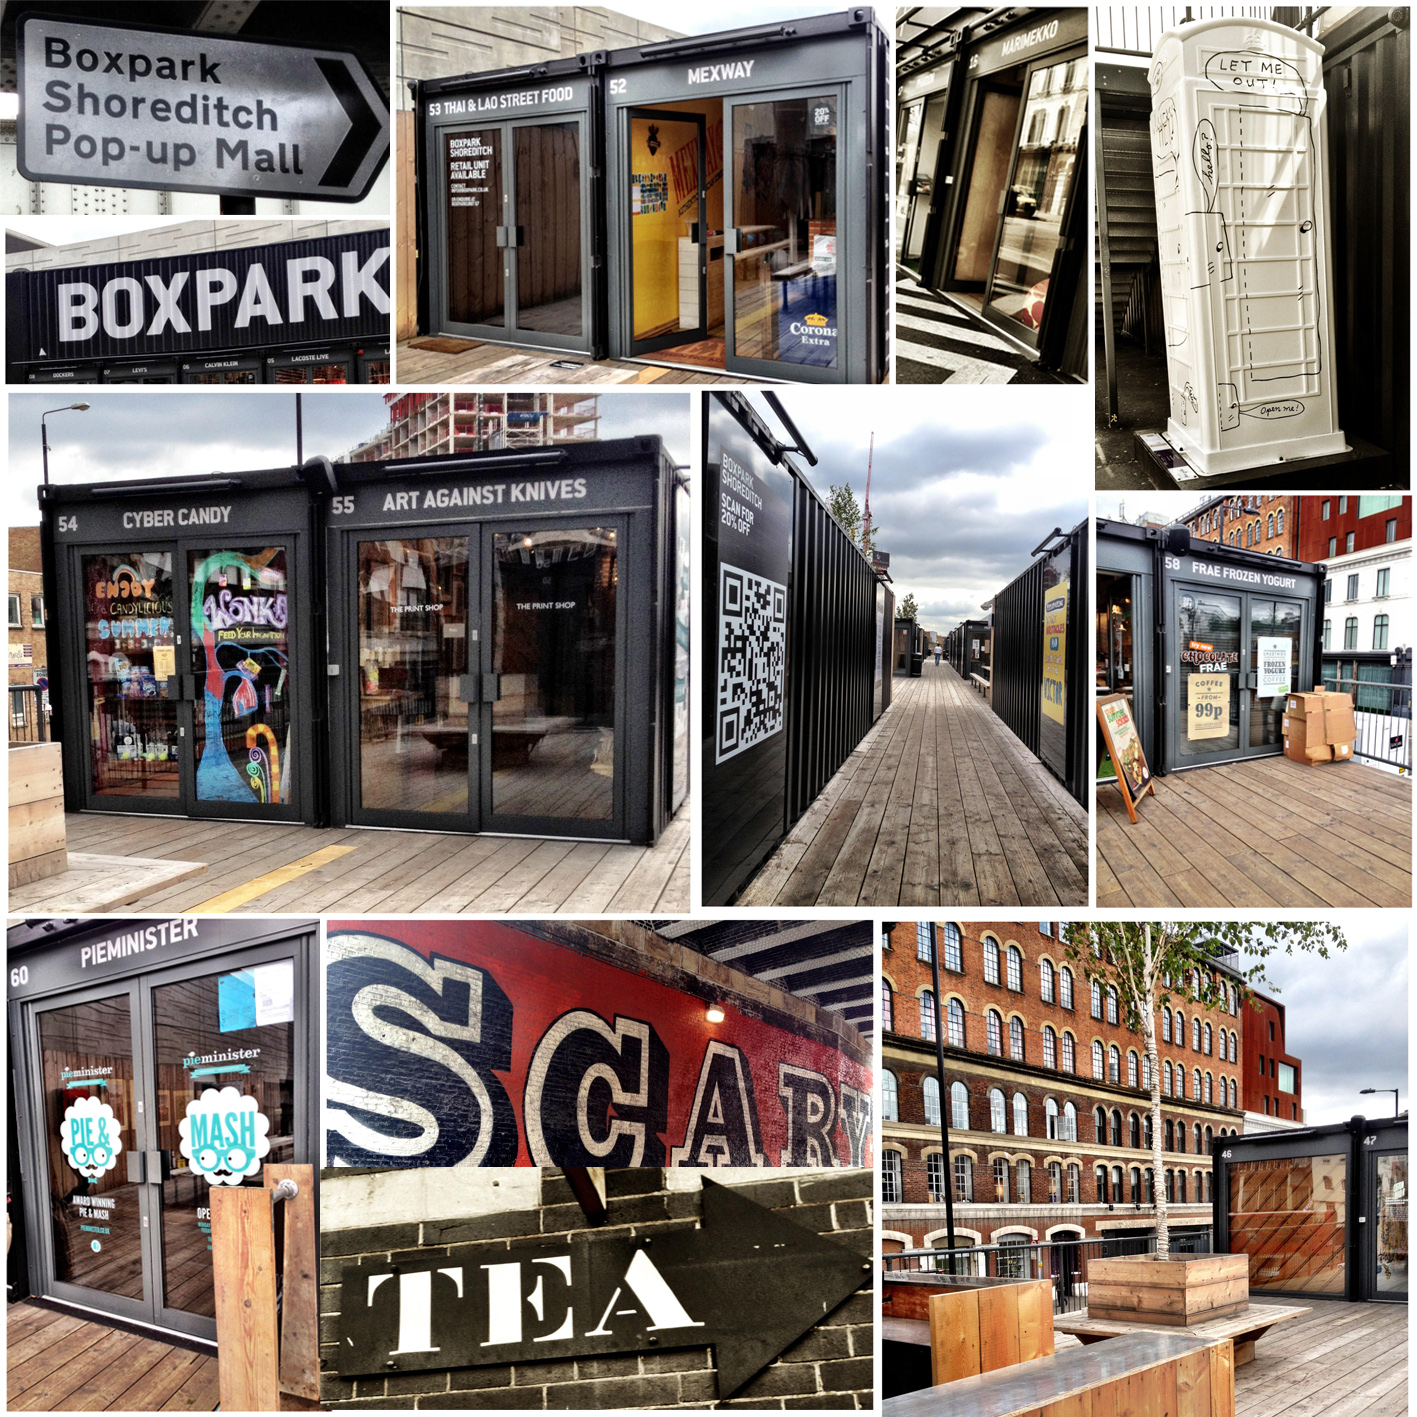 Off the beaten track London; Boxpark Pop-up Mall